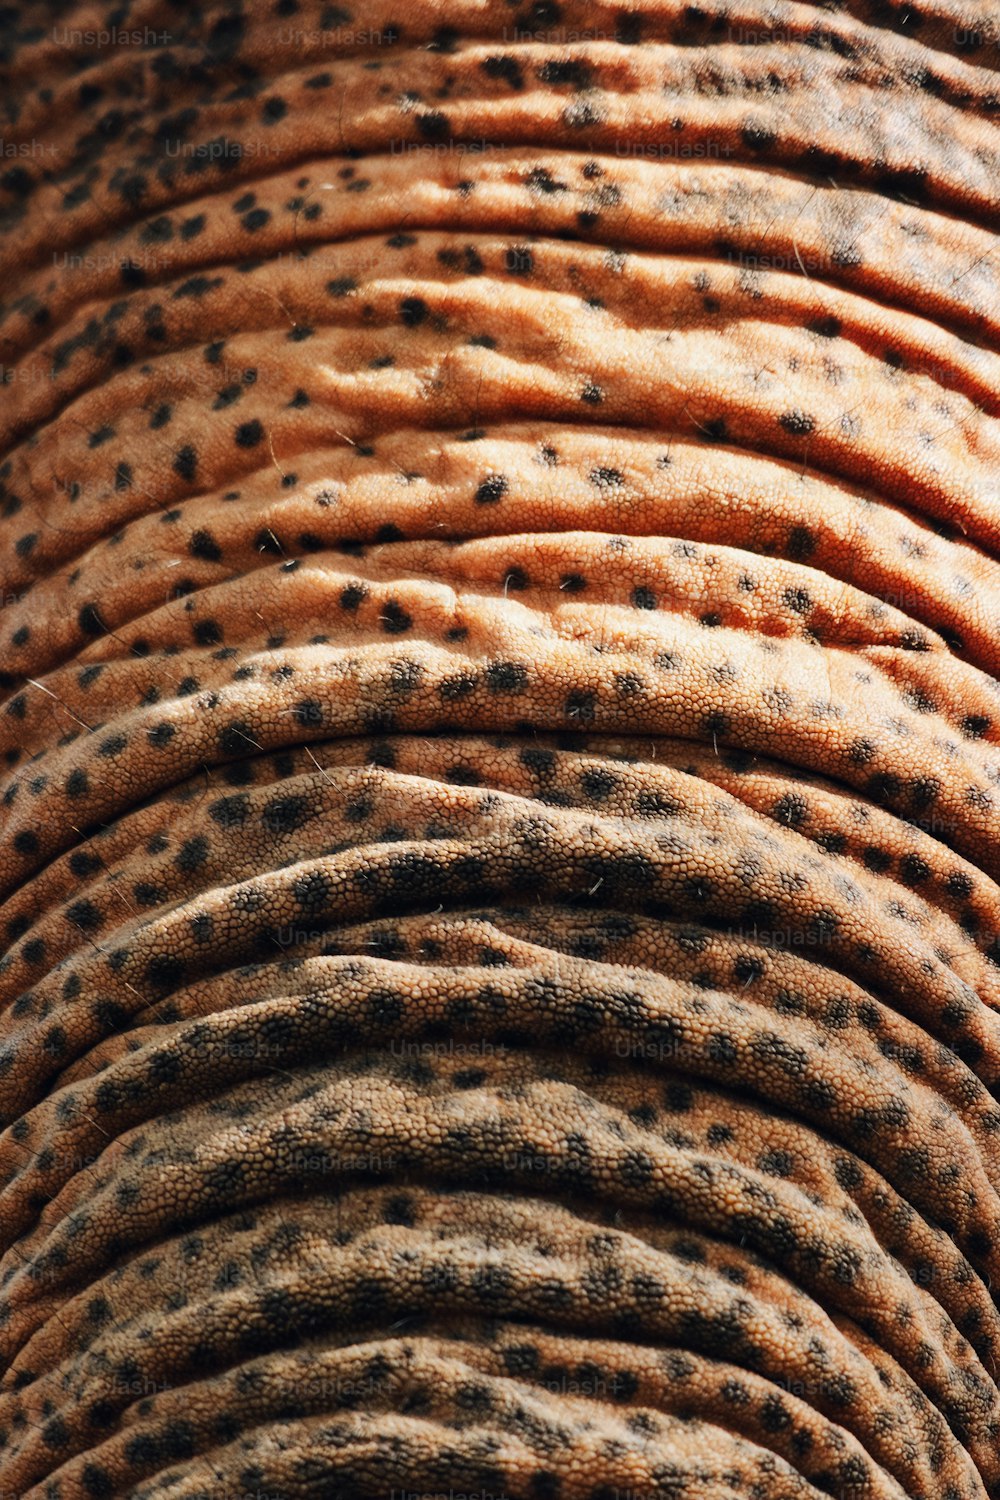 a close up view of the skin of an elephant